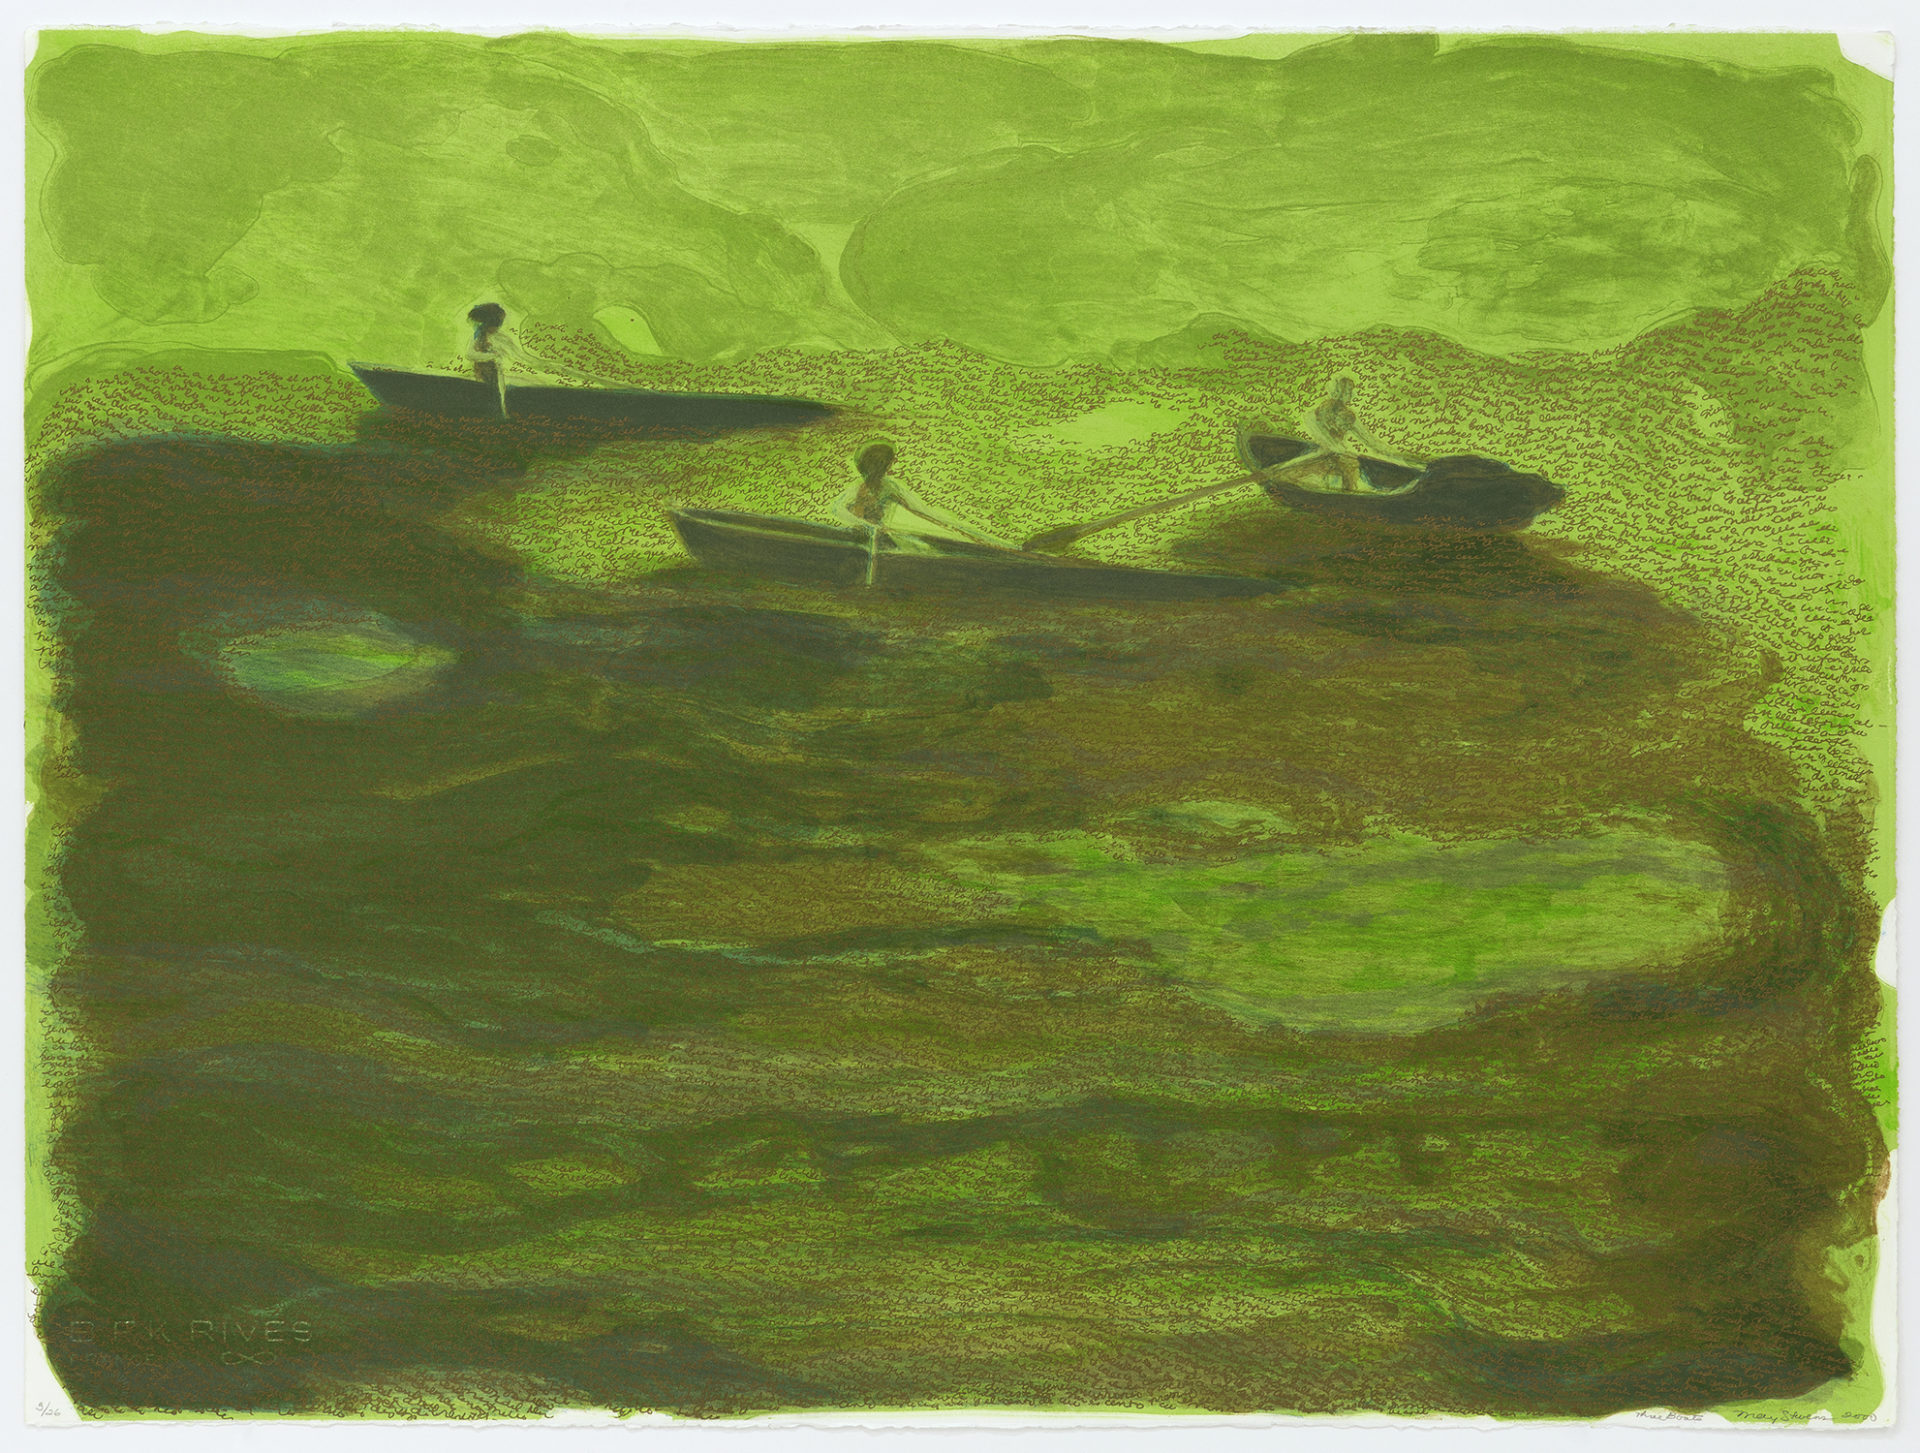 Three Boats on a Green Green Sea, 2000, Lithograph, 22 x 30 inches (55.9 x 76.2 cm), Edition of 26